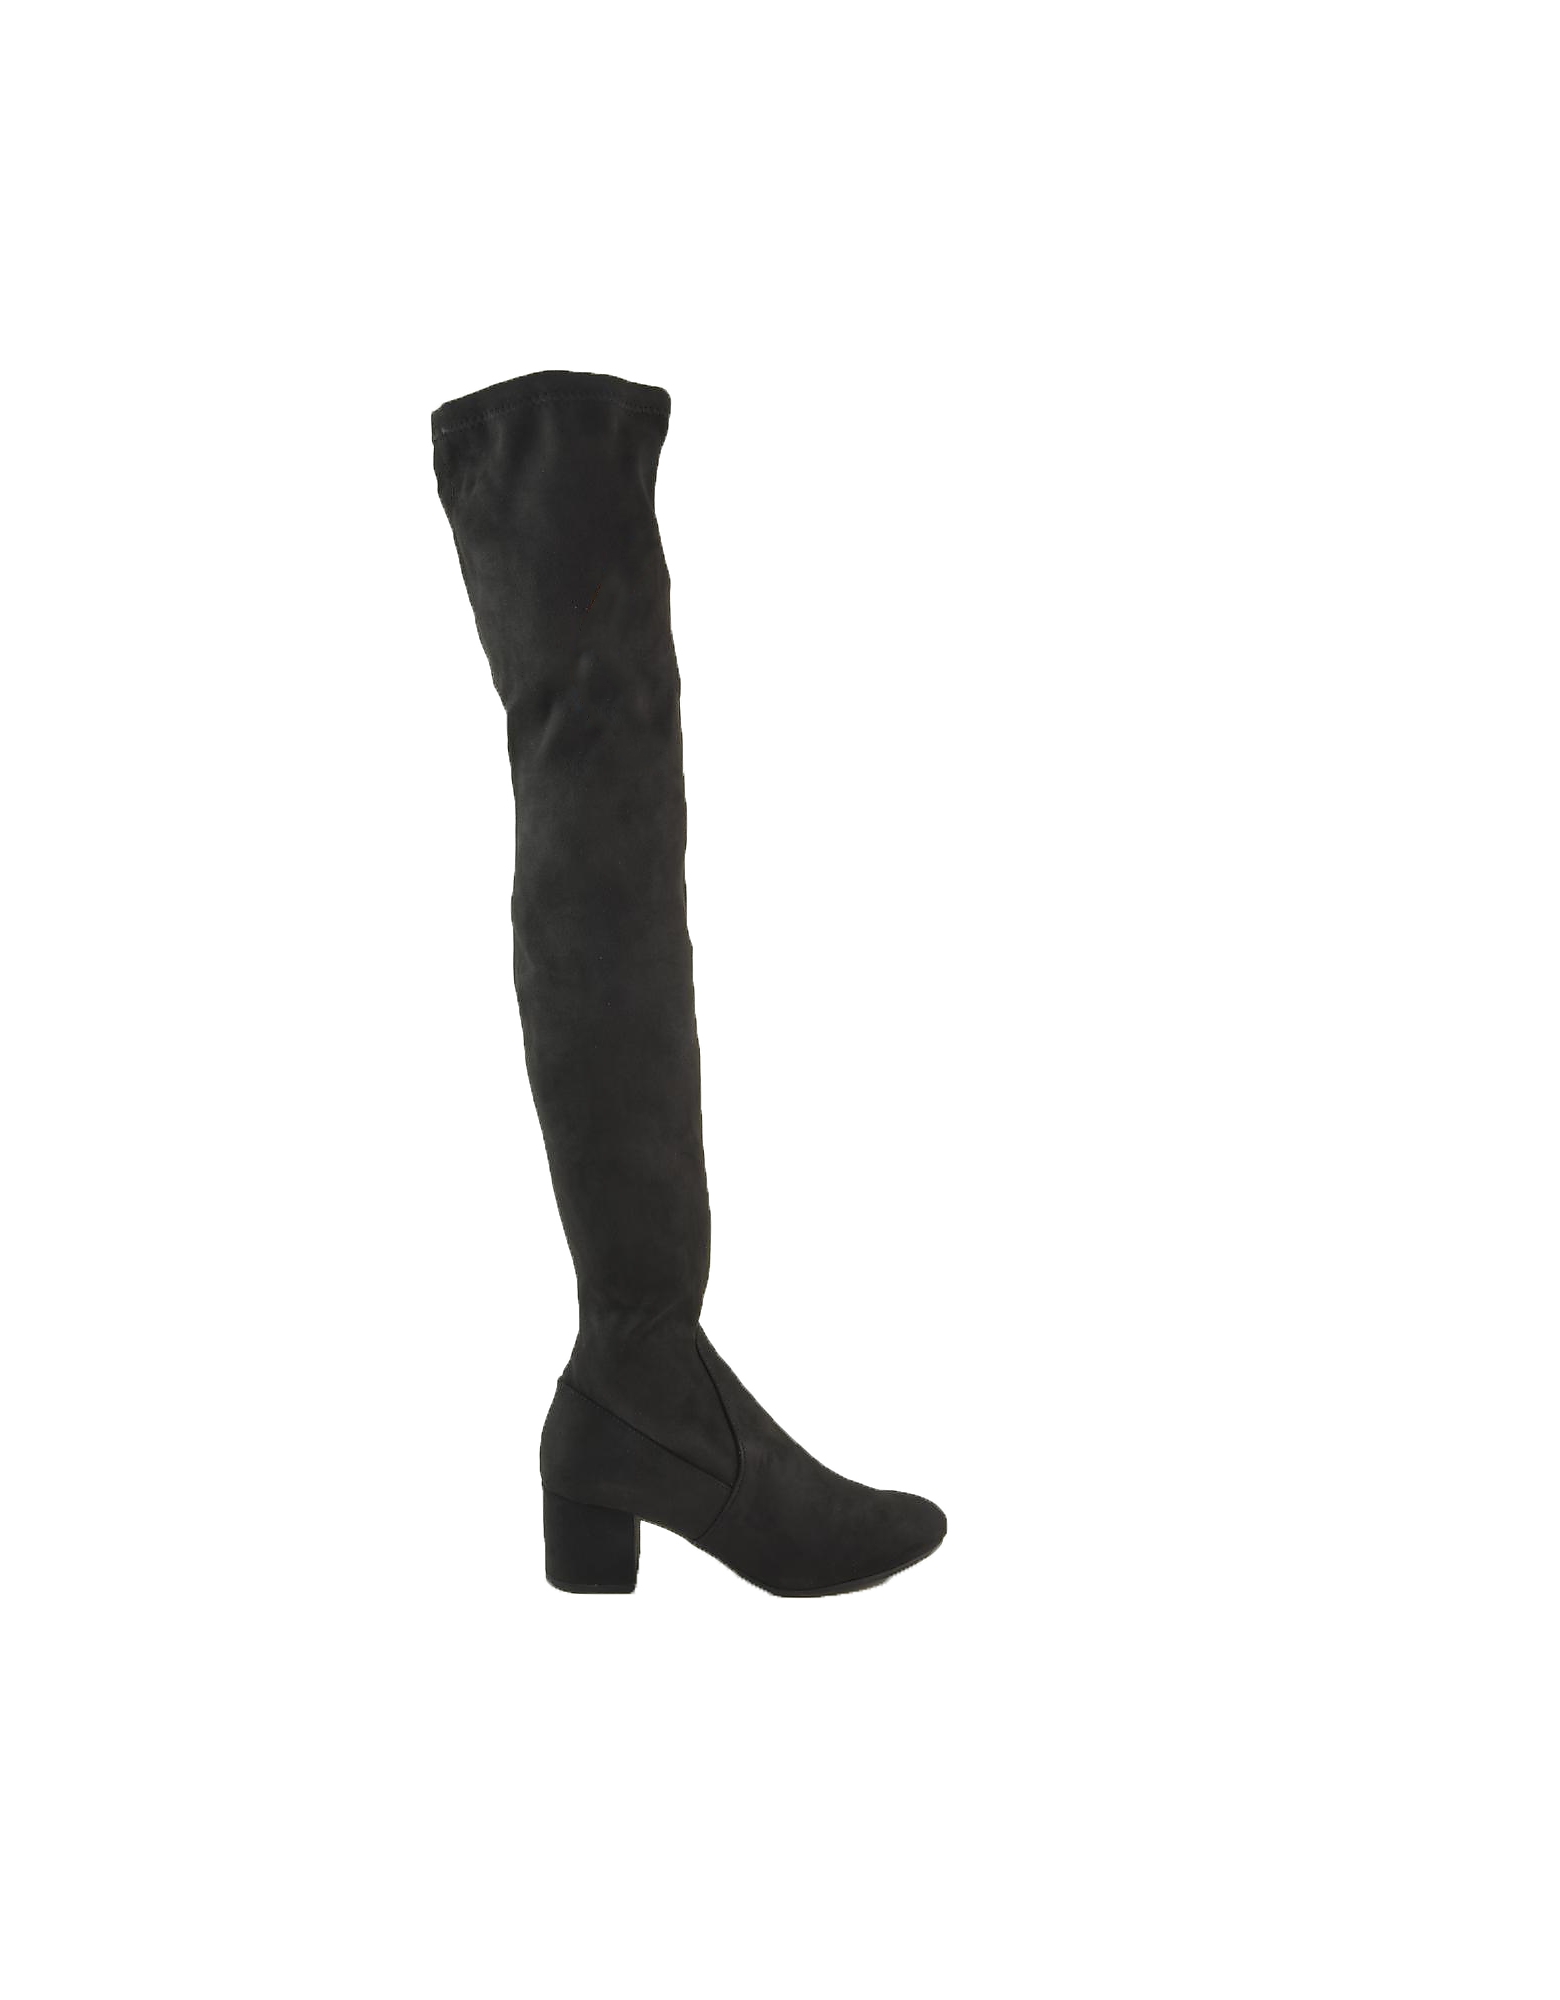 Steve Madden  Shoes Black Over-The-Knee Boots